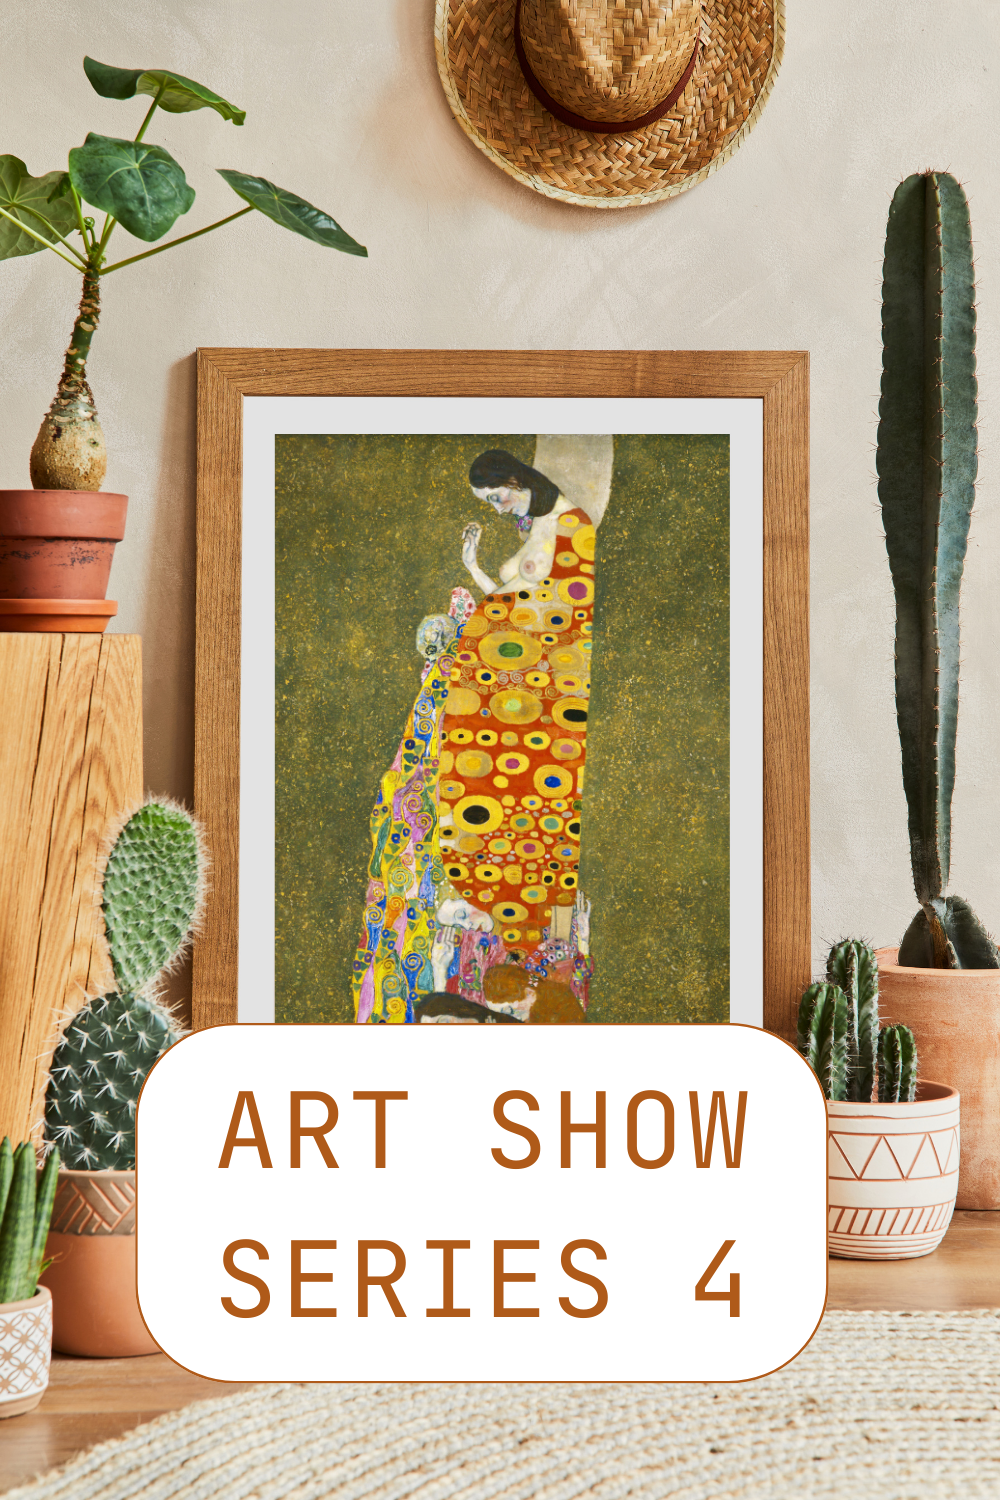 You are currently viewing Art Show Series 4